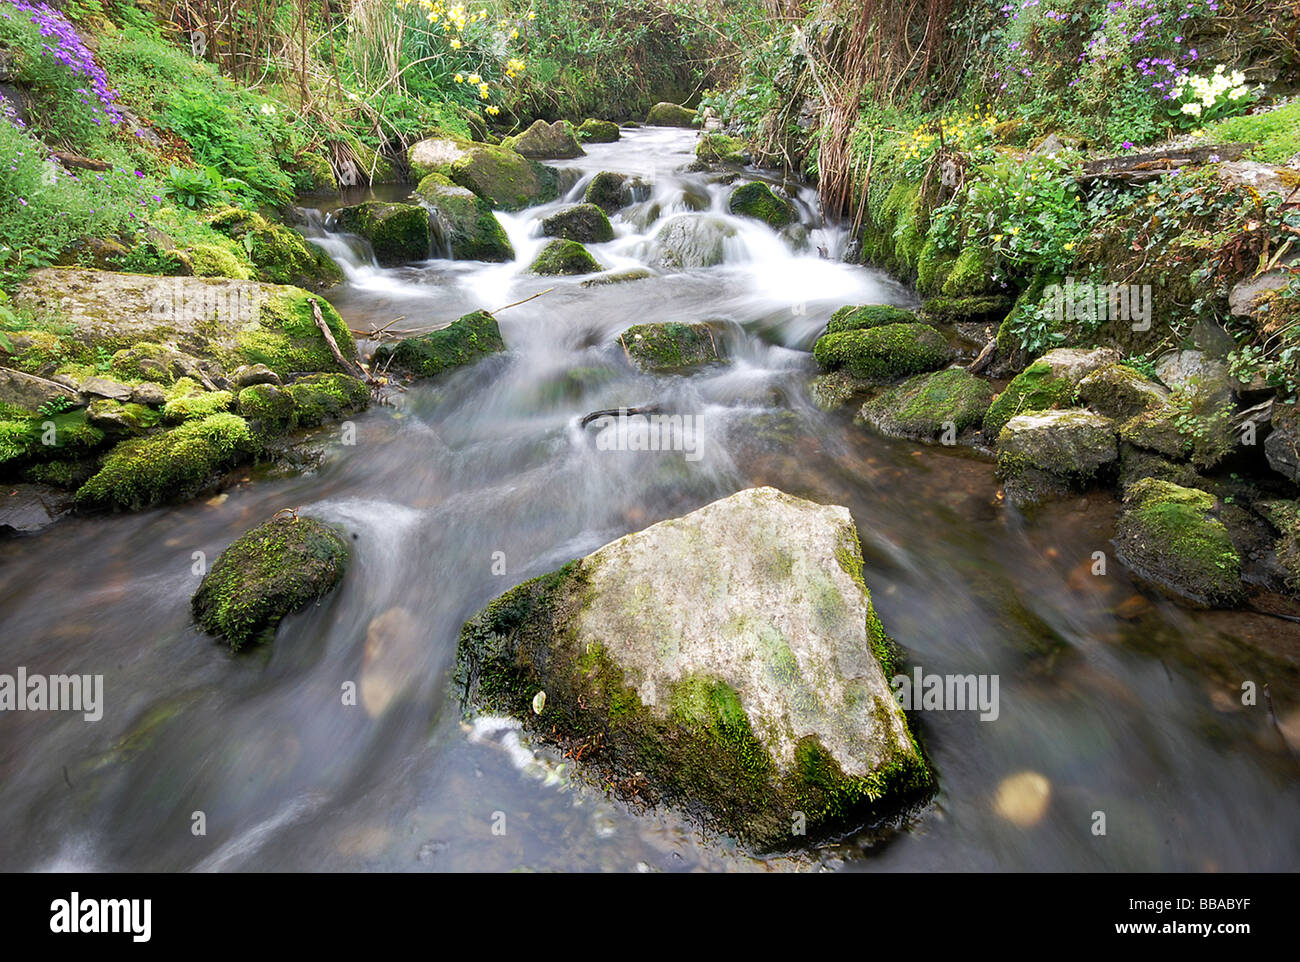 Rocks and Flowers by a clear running country moorland stream Stock Photo